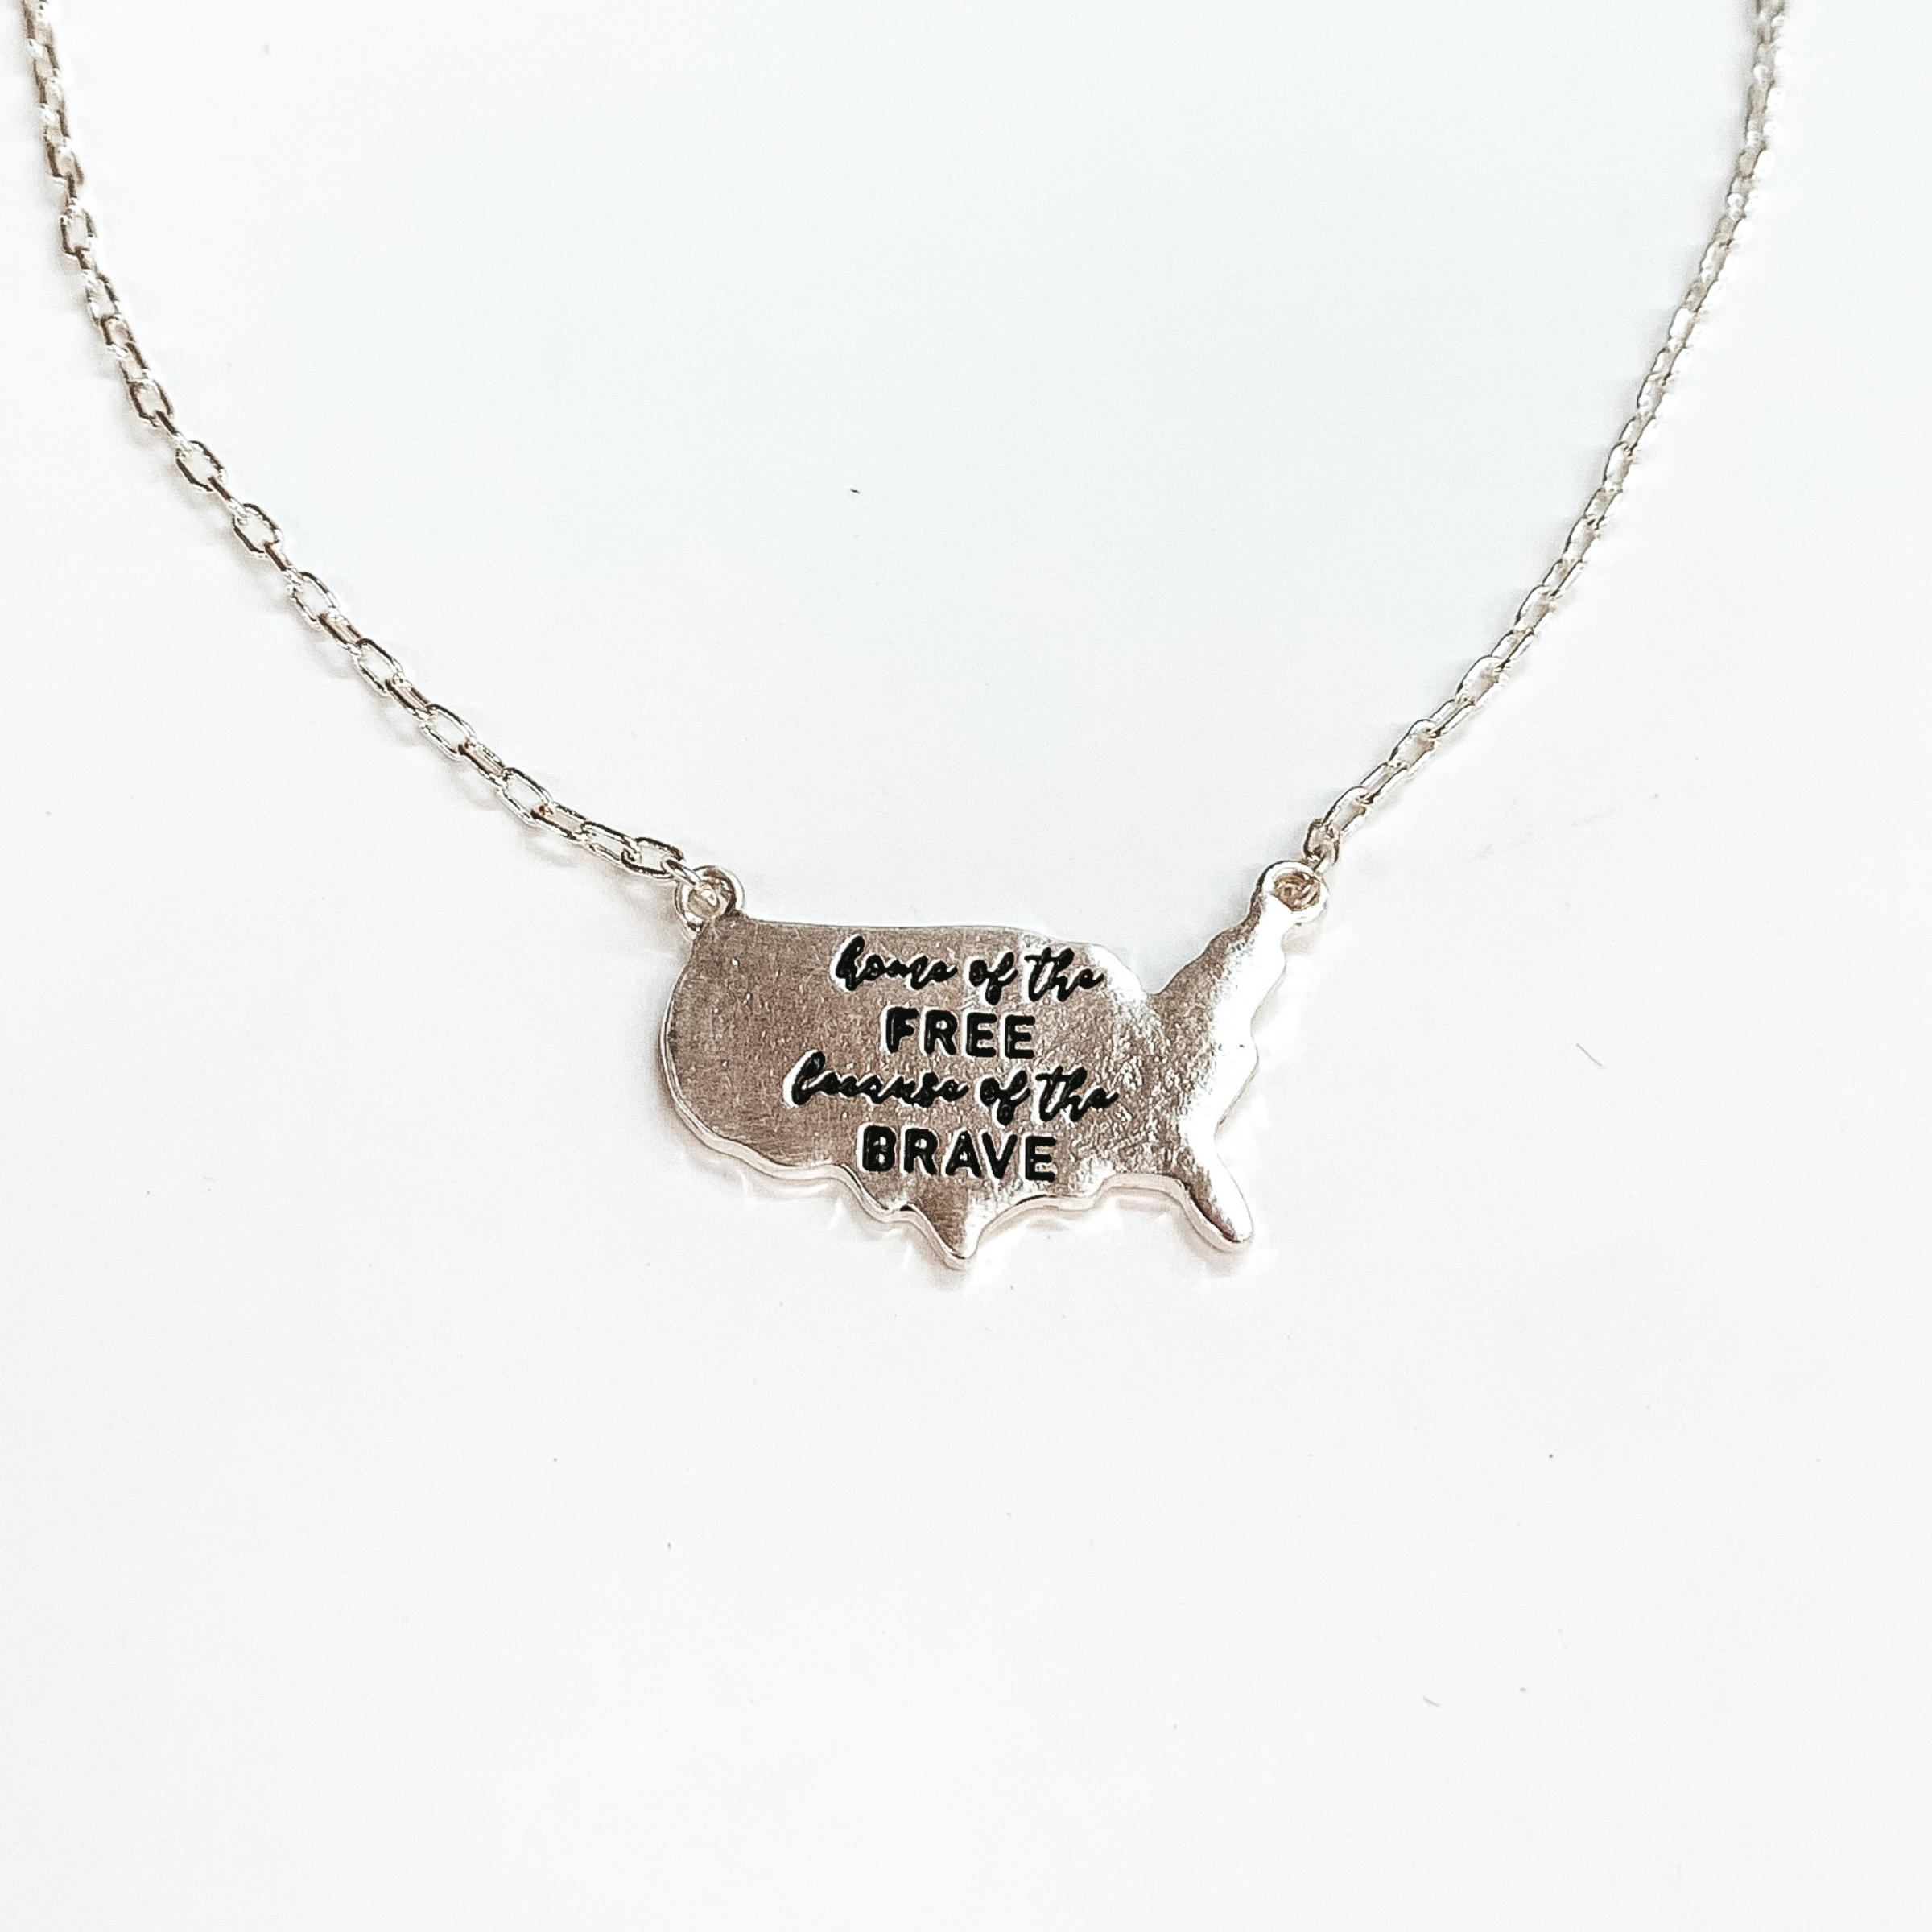 Home of the Free Because of the Brave Silver Necklace with USA Pendant - Giddy Up Glamour Boutique